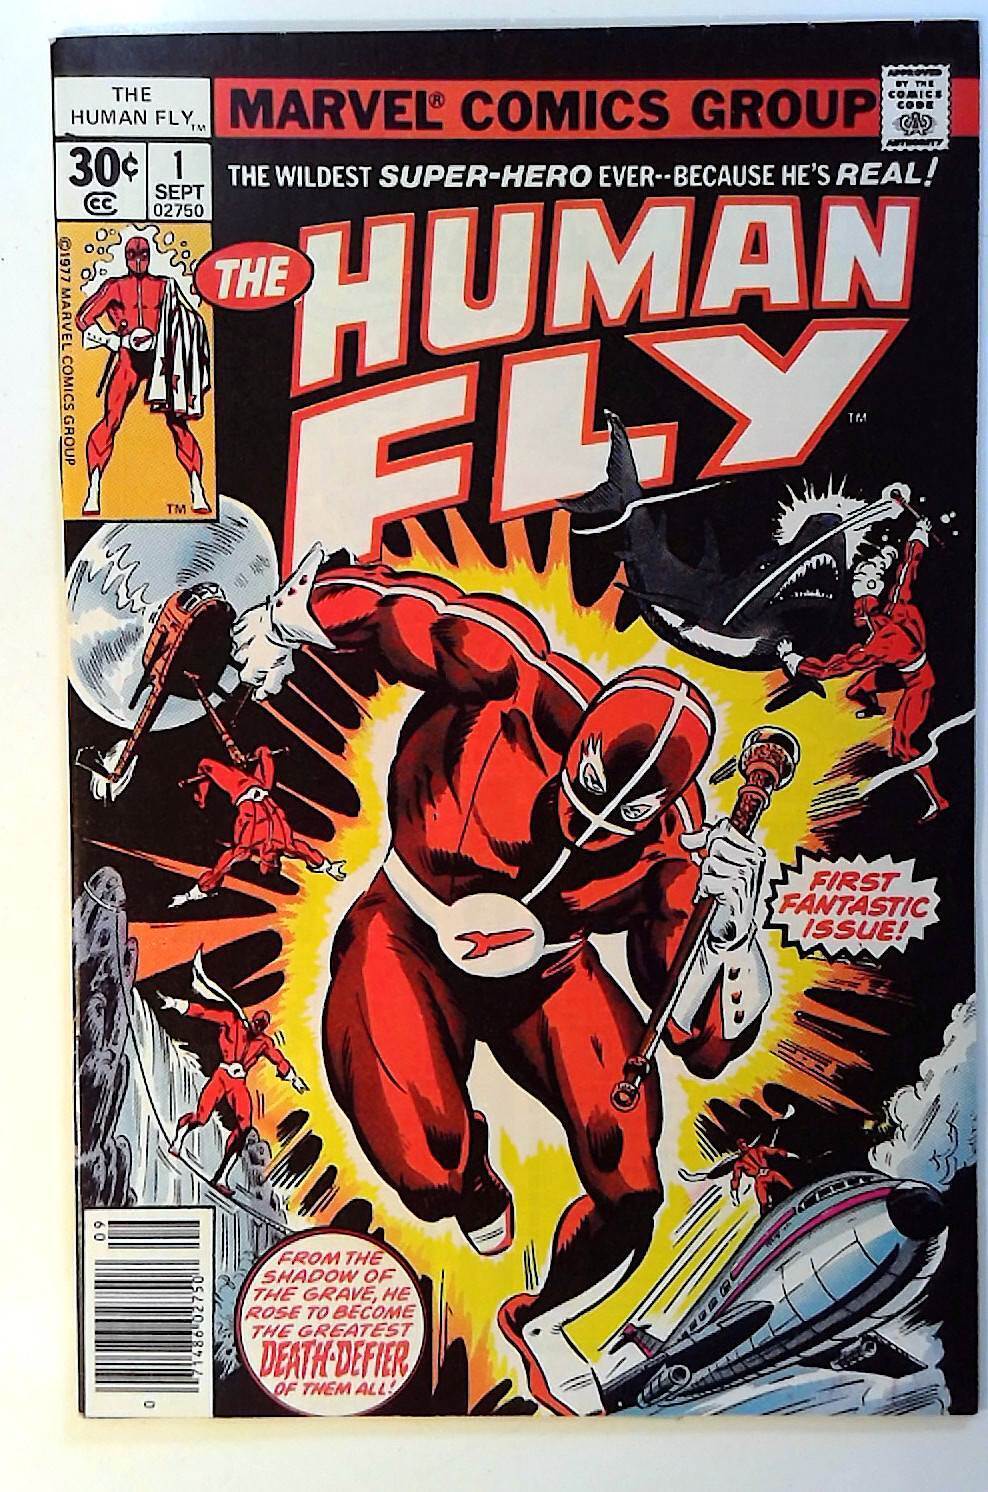 The Human Fly #1 Marvel (1977) VF+ 1st Print Comic Book